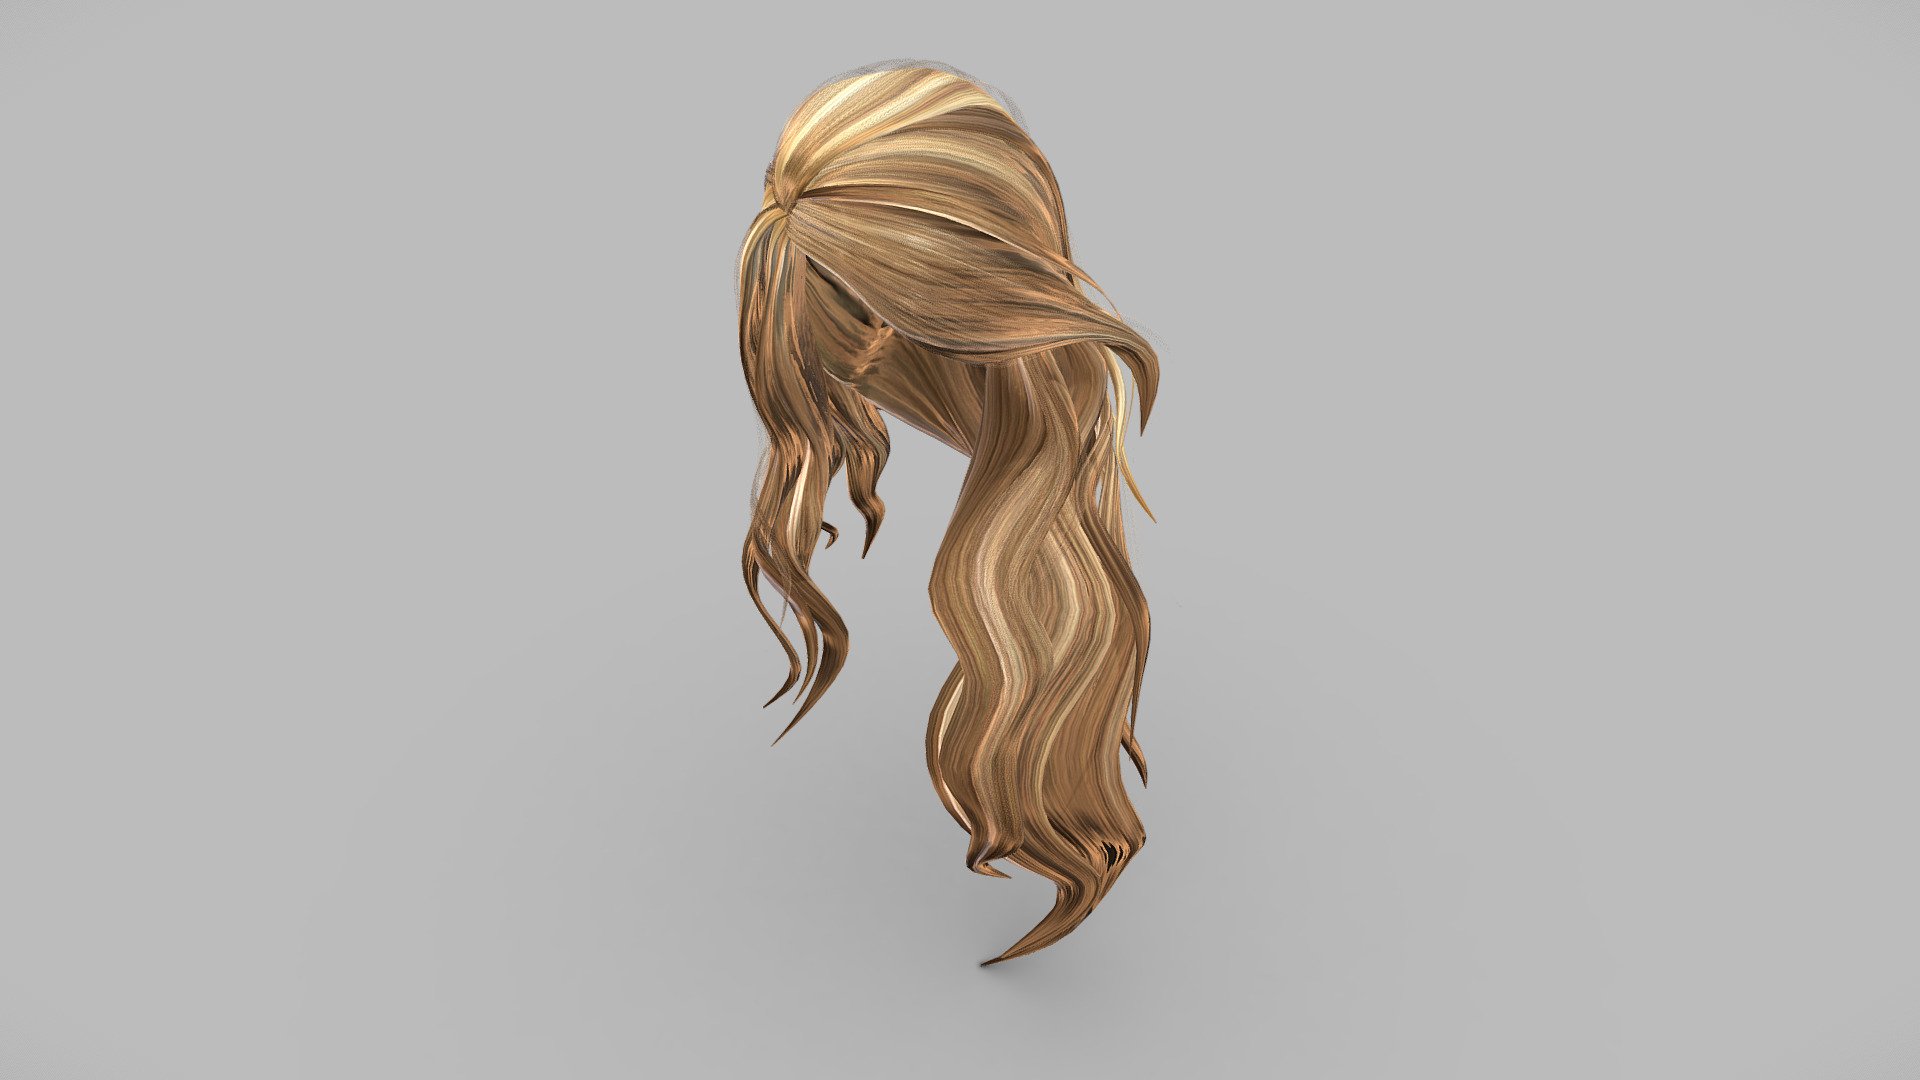 Low Poly Mesh polygon hair with solids and transparents layered with no tranparency flickering issue

Can be used for any character

FBX, OBJ, gITF, USDZ (request other formats)

PBR or Classic

Type     user:3dia &ldquo;search term